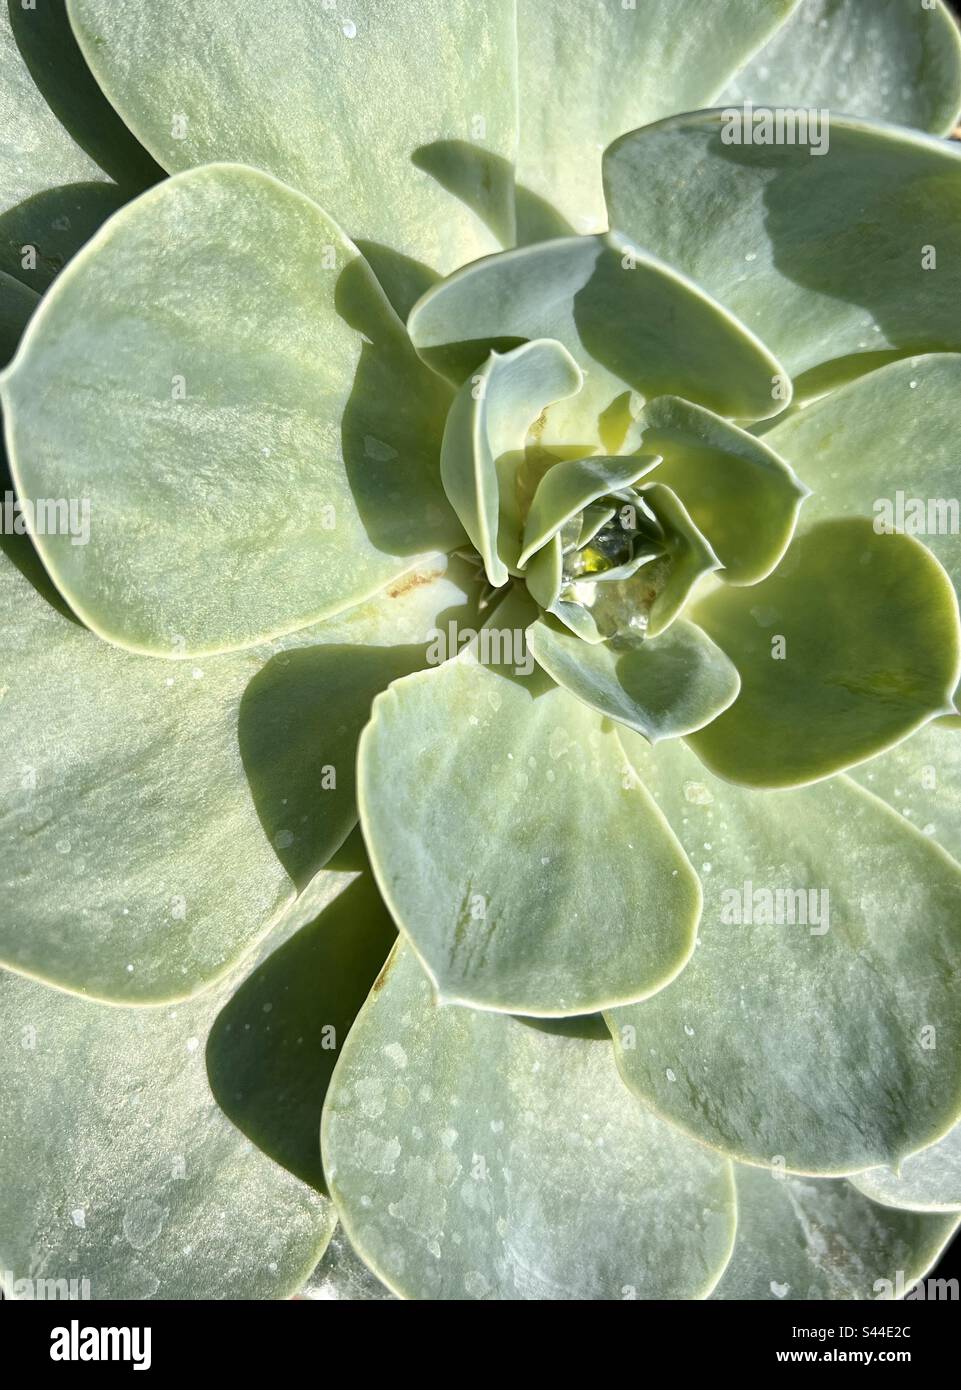 Echeveria succulent plant from above Stock Photo